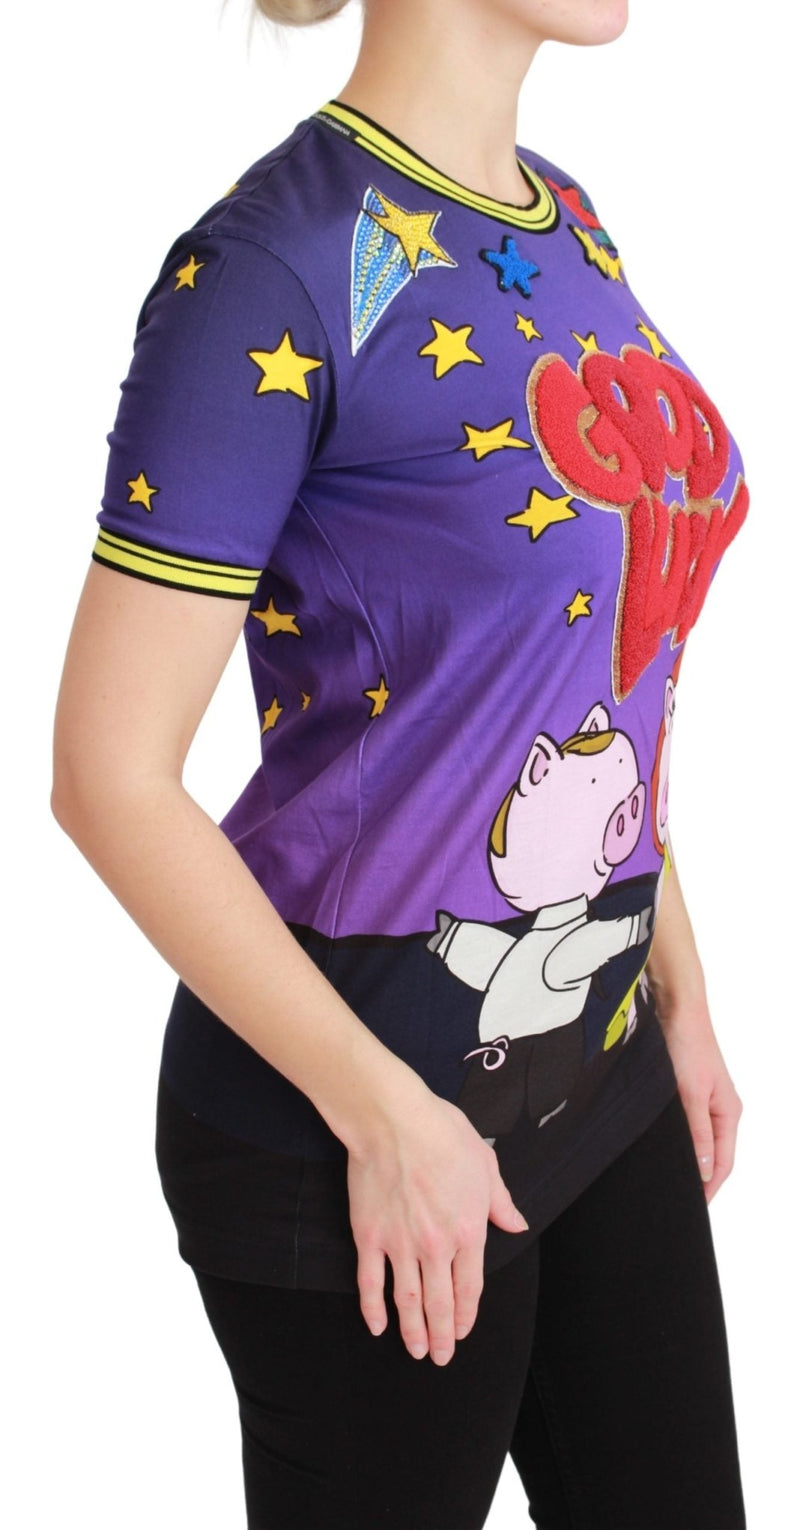 Purple YEAR OF THE PIG Top Cotton T-shirt - Avaz Shop